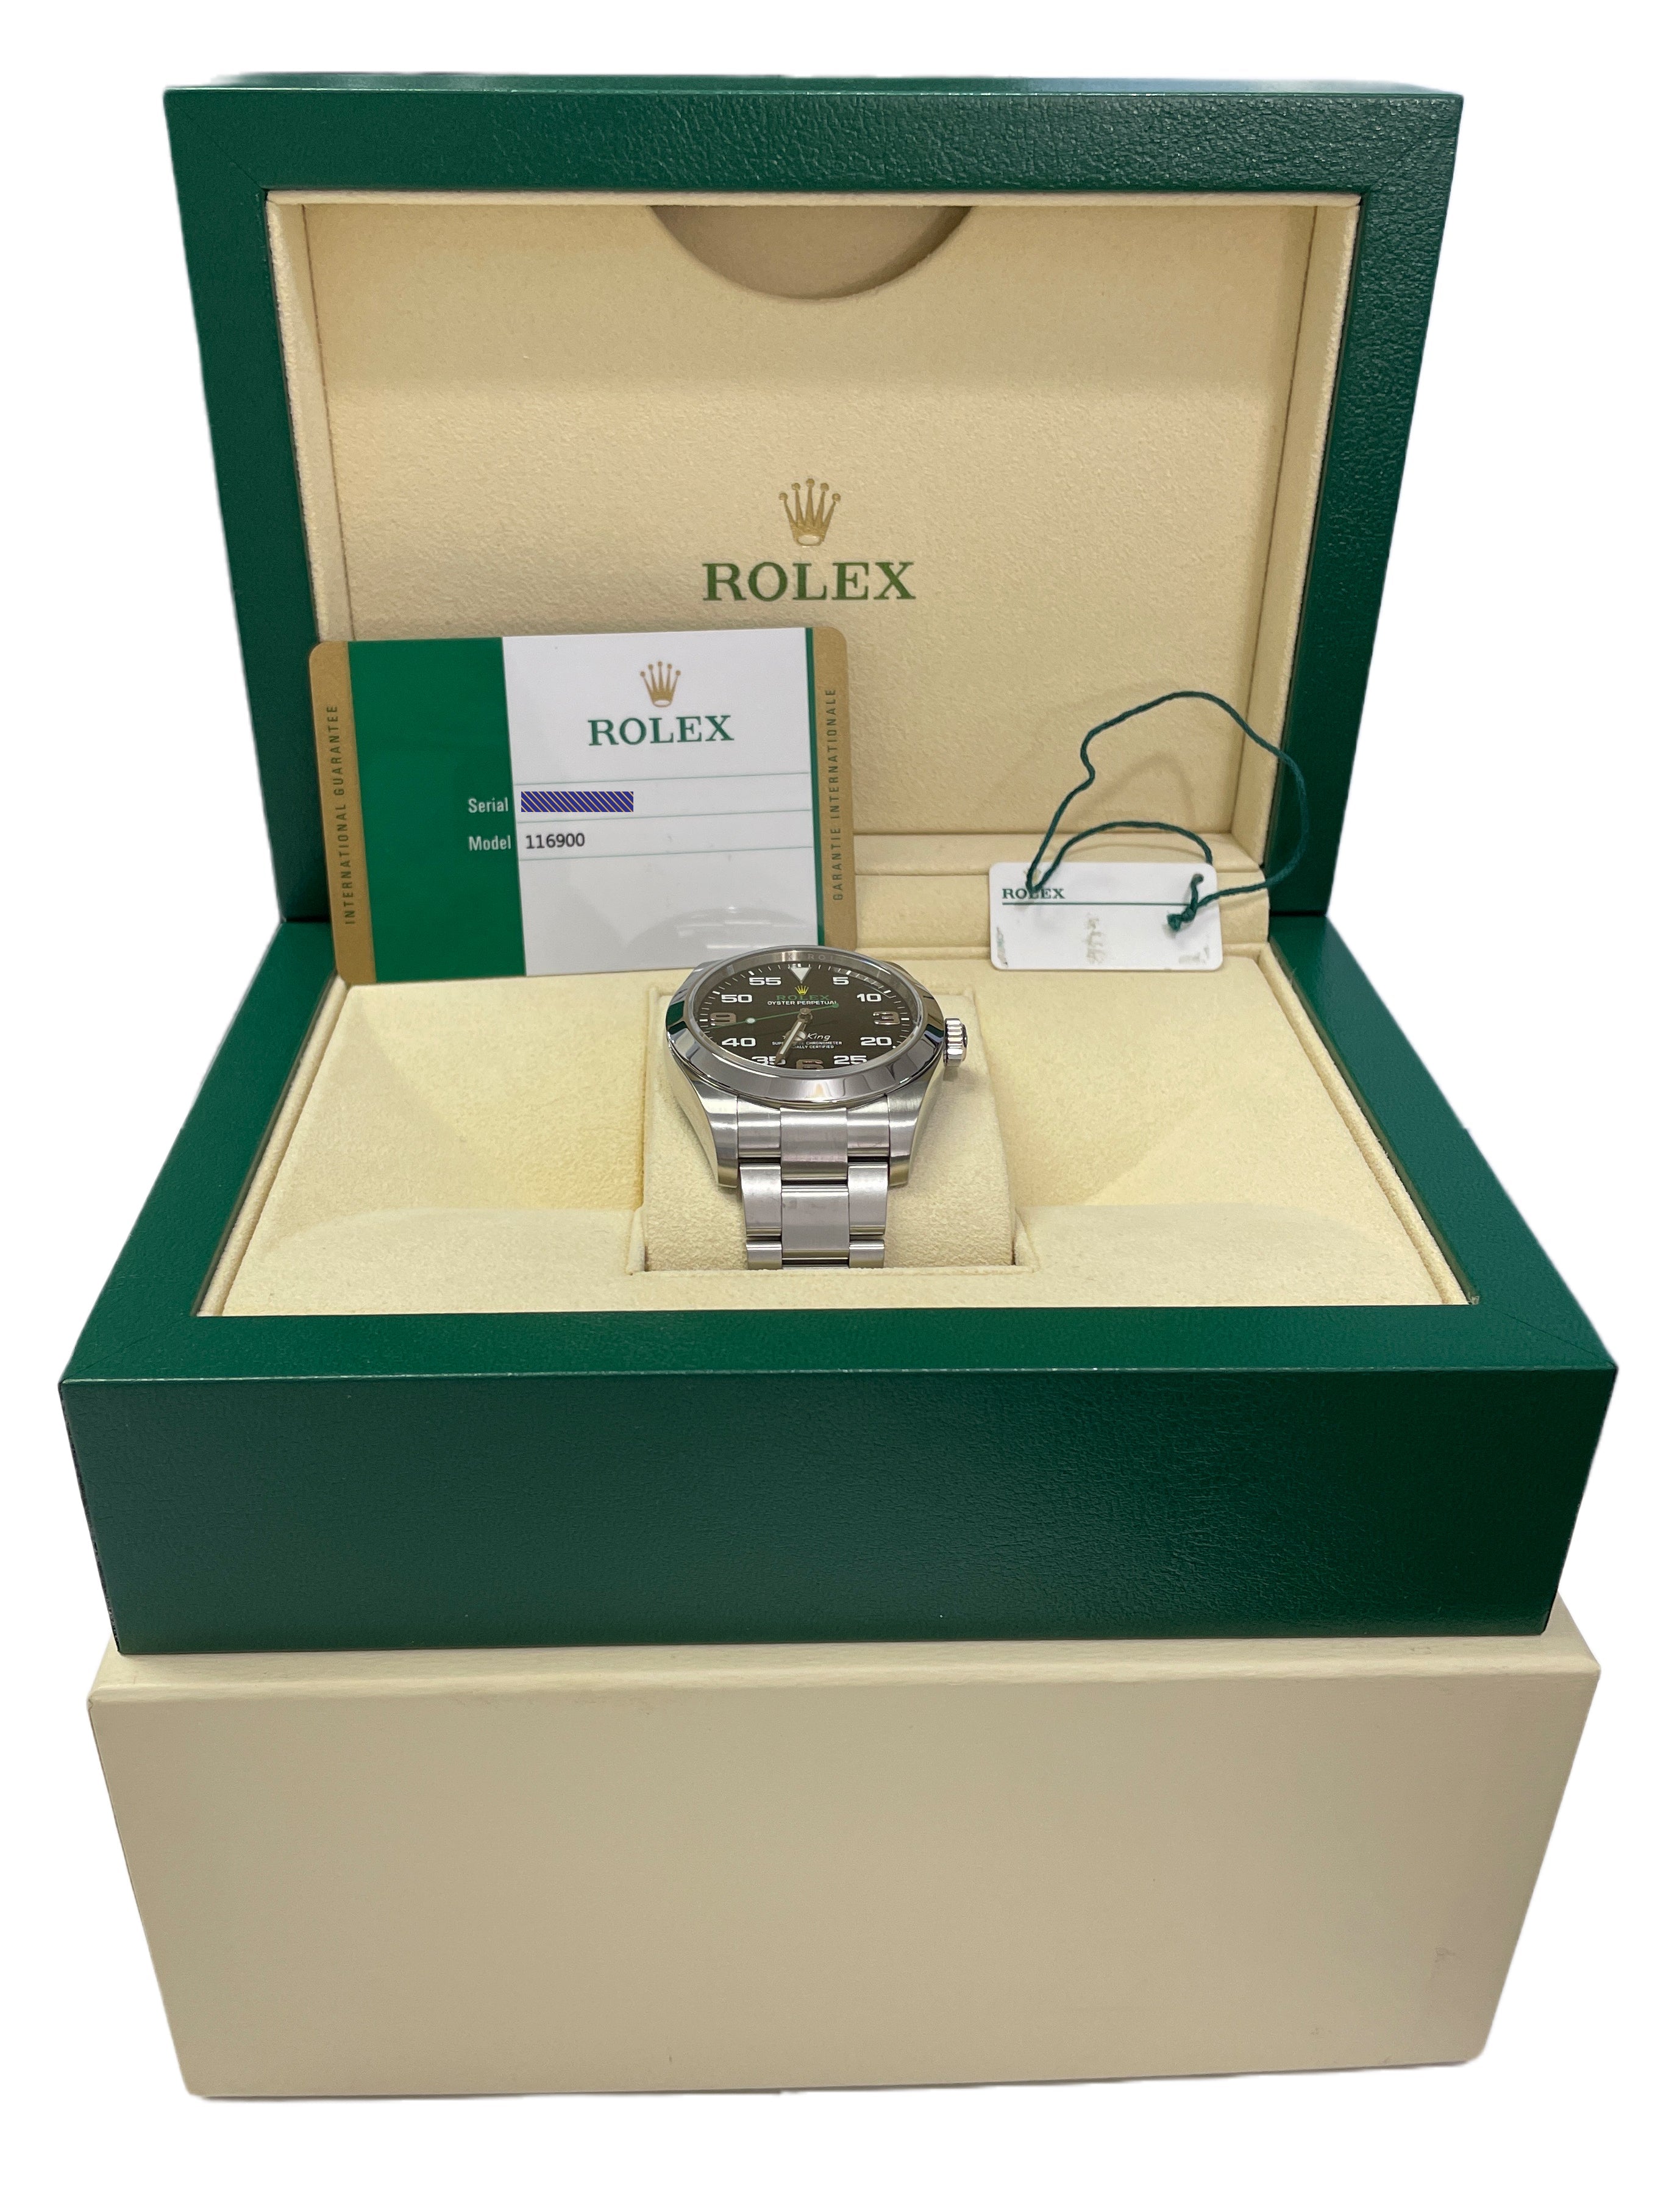 MINT PAPERS Rolex Air-King 40mm Green Black Stainless Steel Oyster 116900 BOX